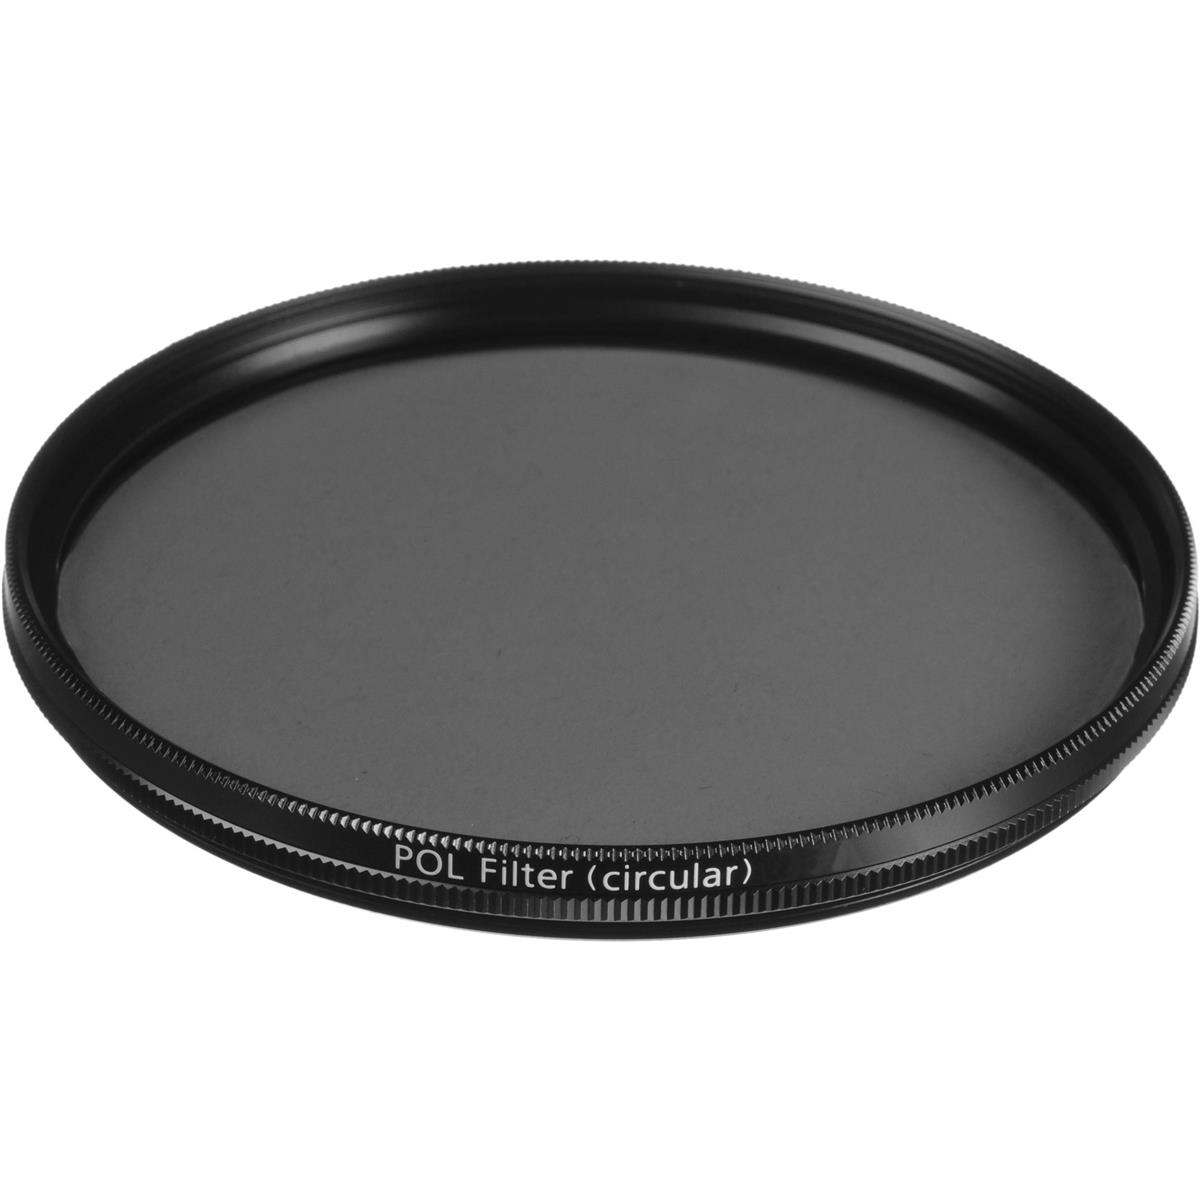 Zeiss 52mm T* Coated Circular Polarizing Filter